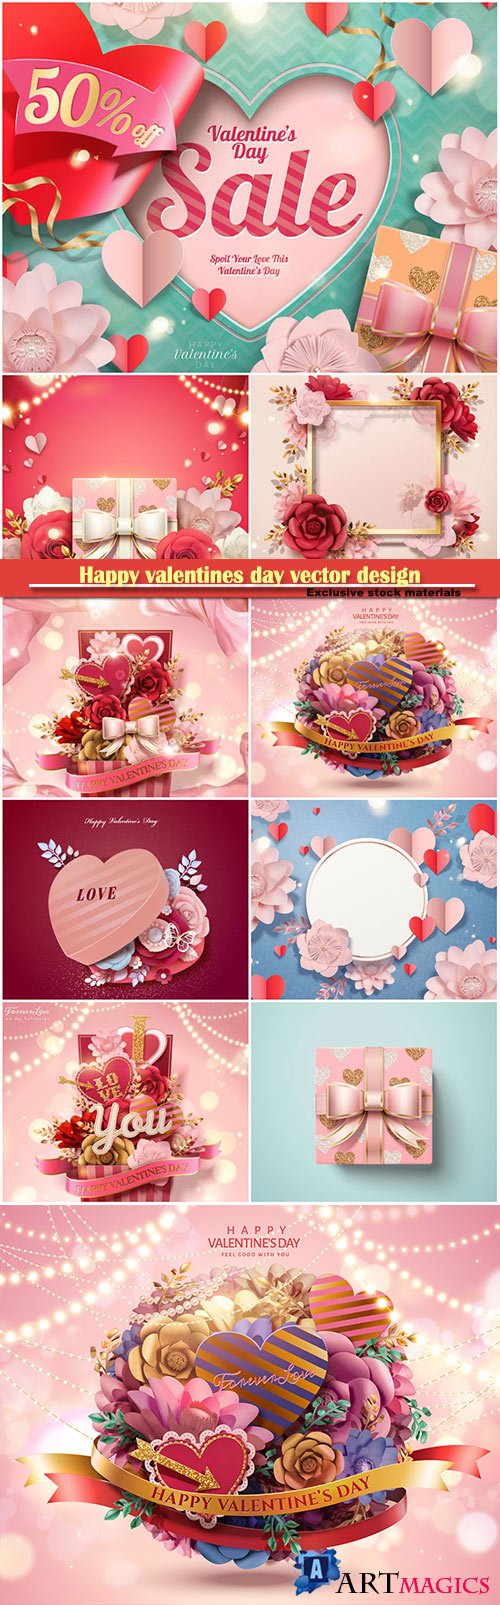 Happy valentines day vector design with heart, balloons, roses in 3d illustration # 10